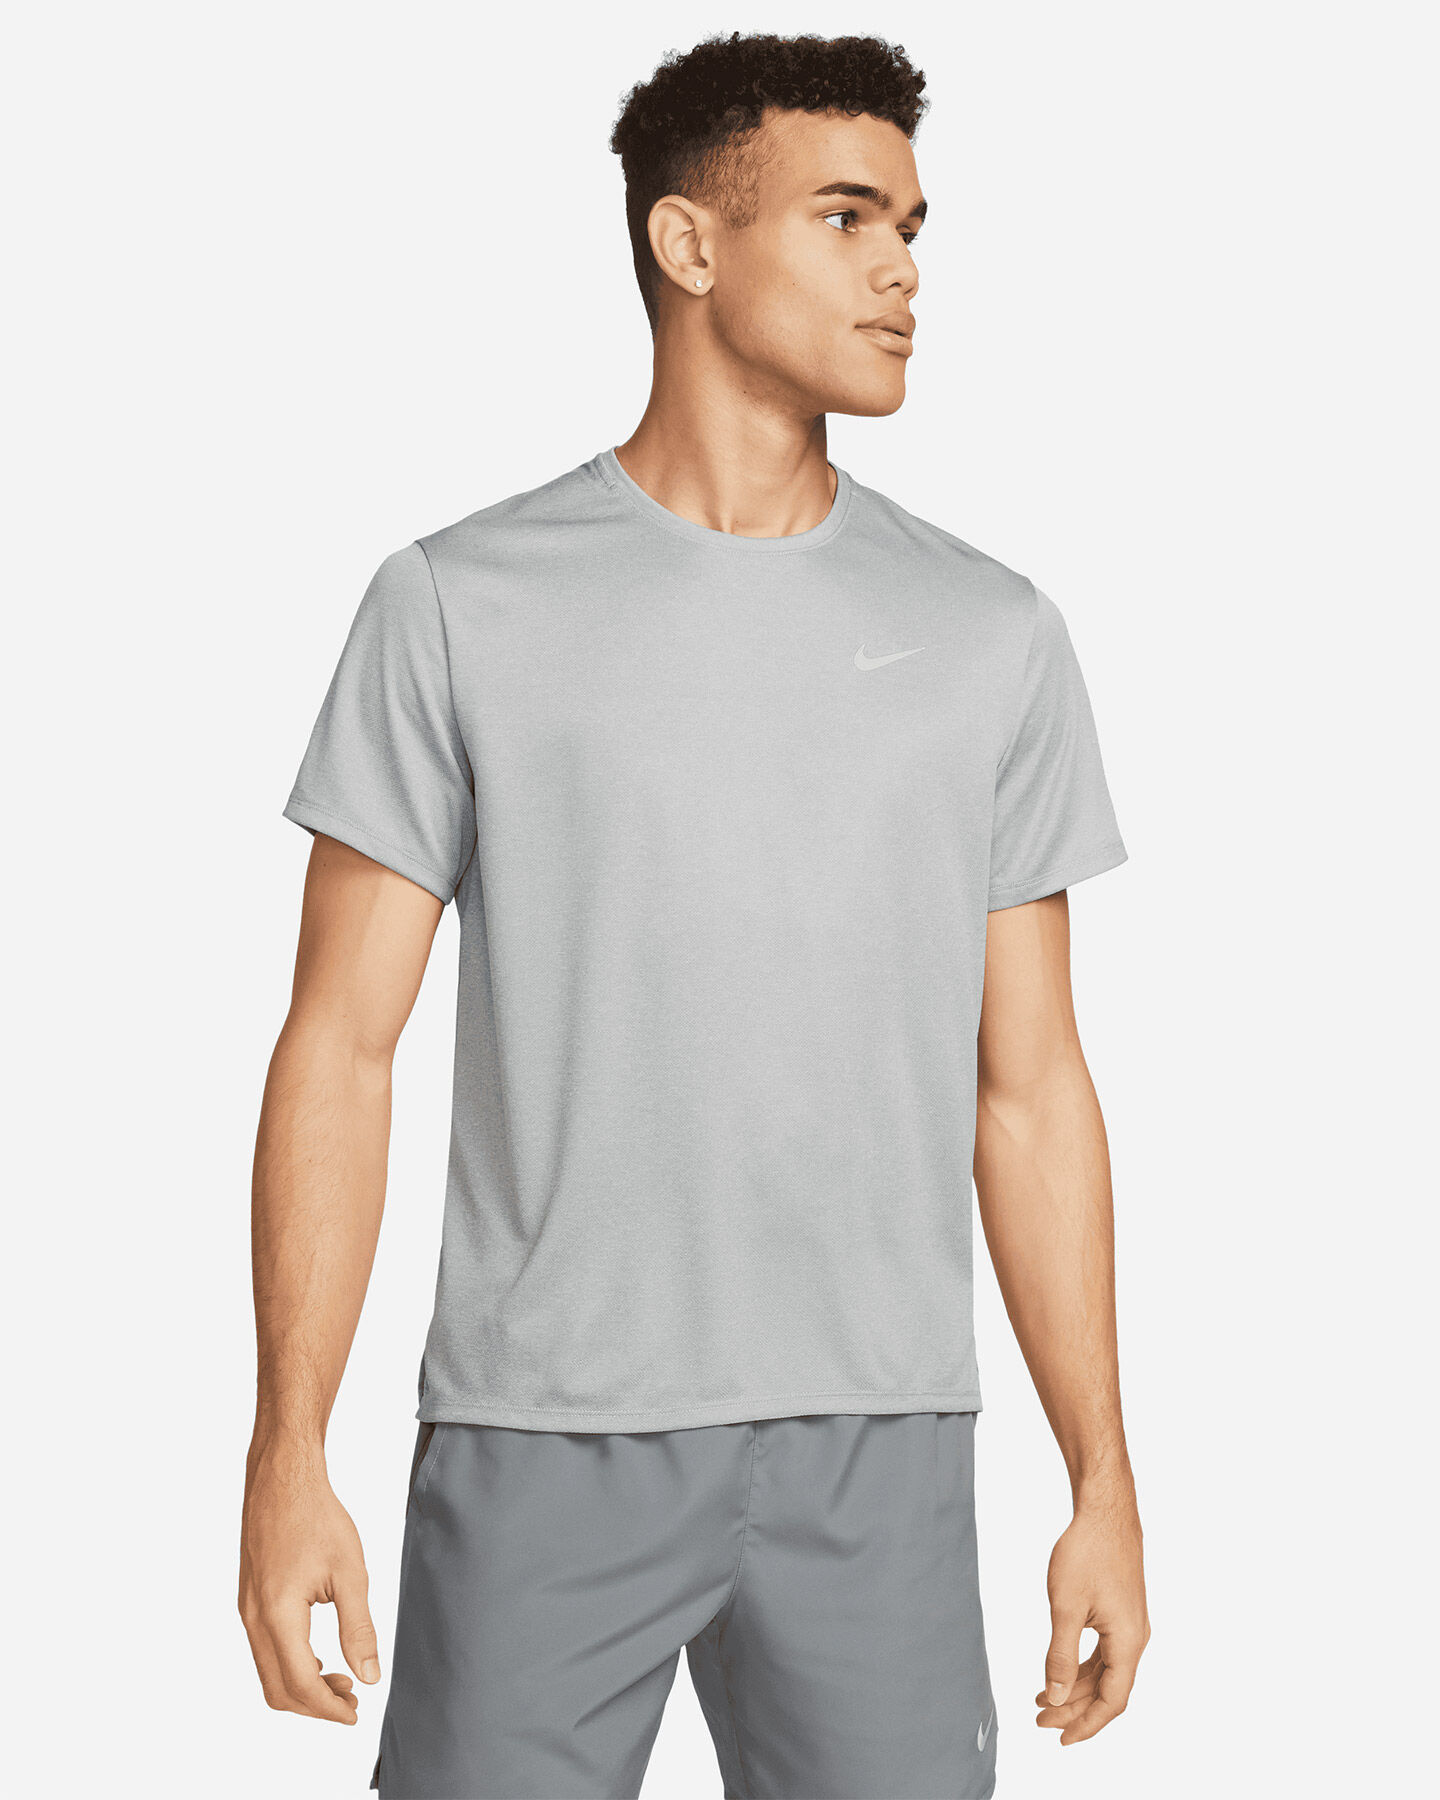  T-Shirt running NIKE DRI FIT MILER M S5538578|084|S scatto 0